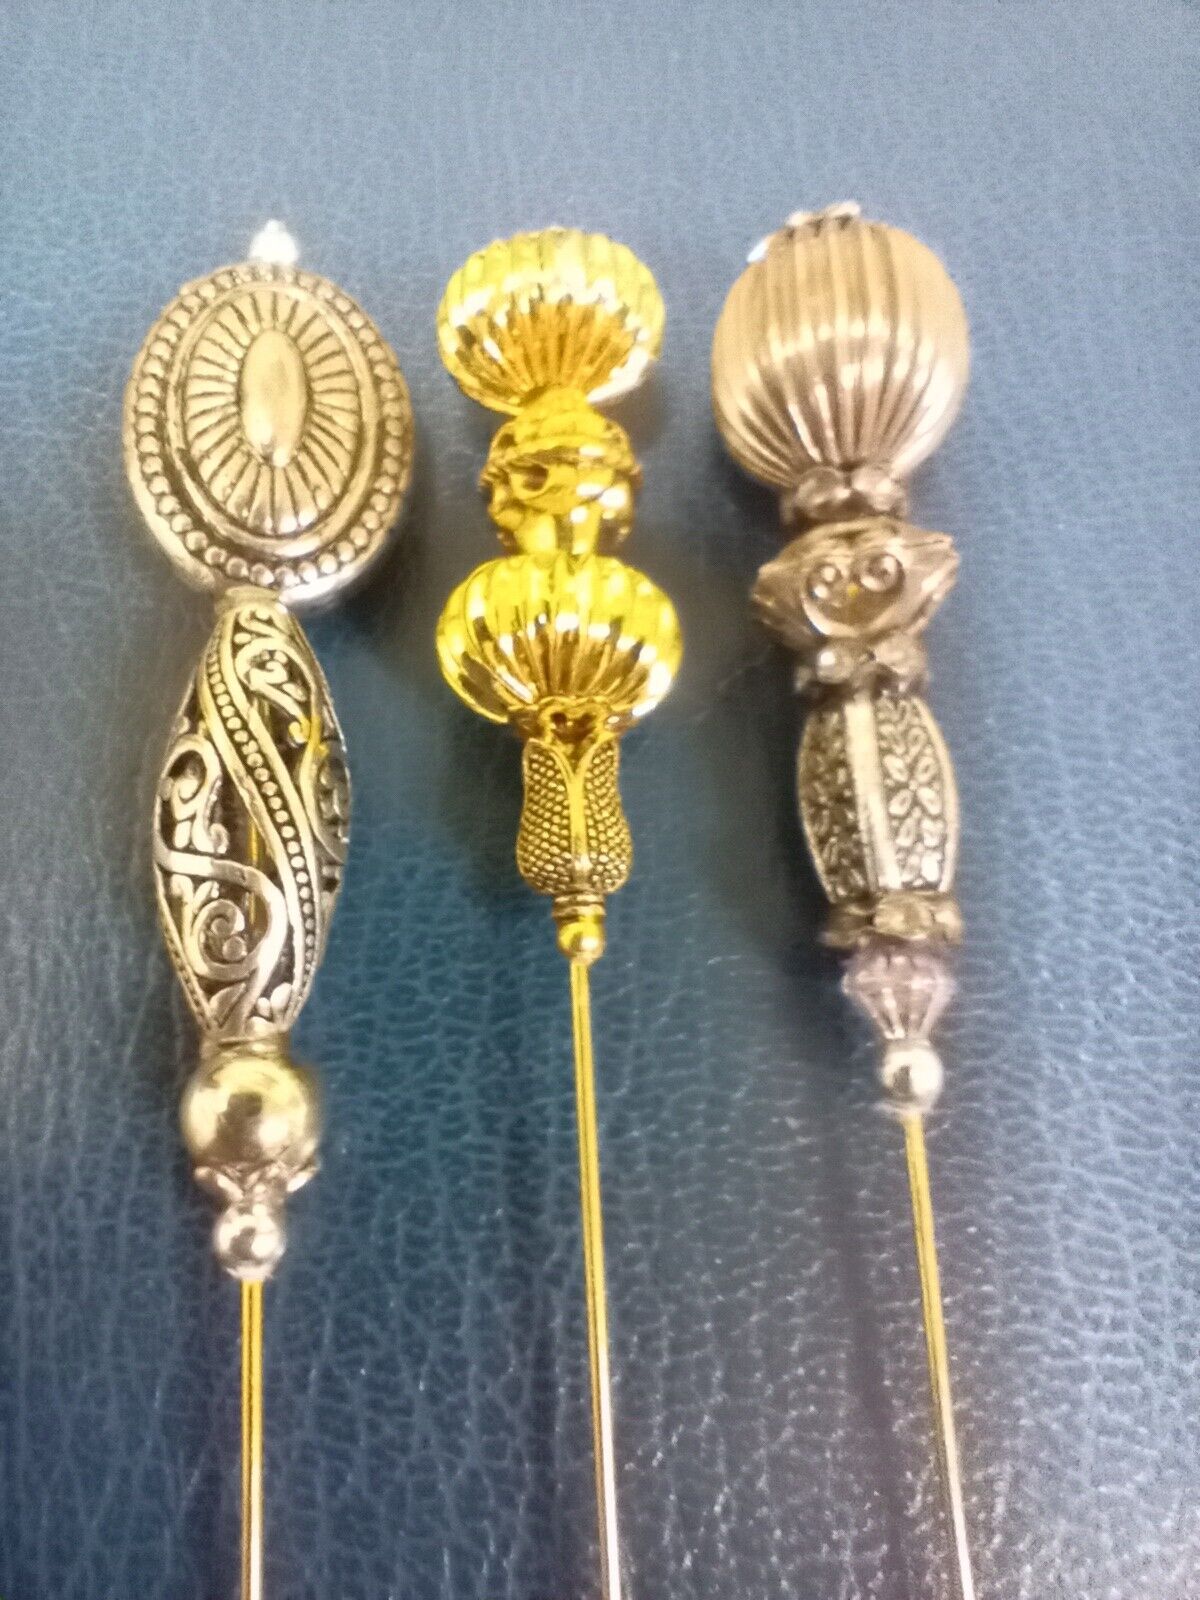 Antique Styled Metal or Metallic topped  Victorian styled HAT PINS